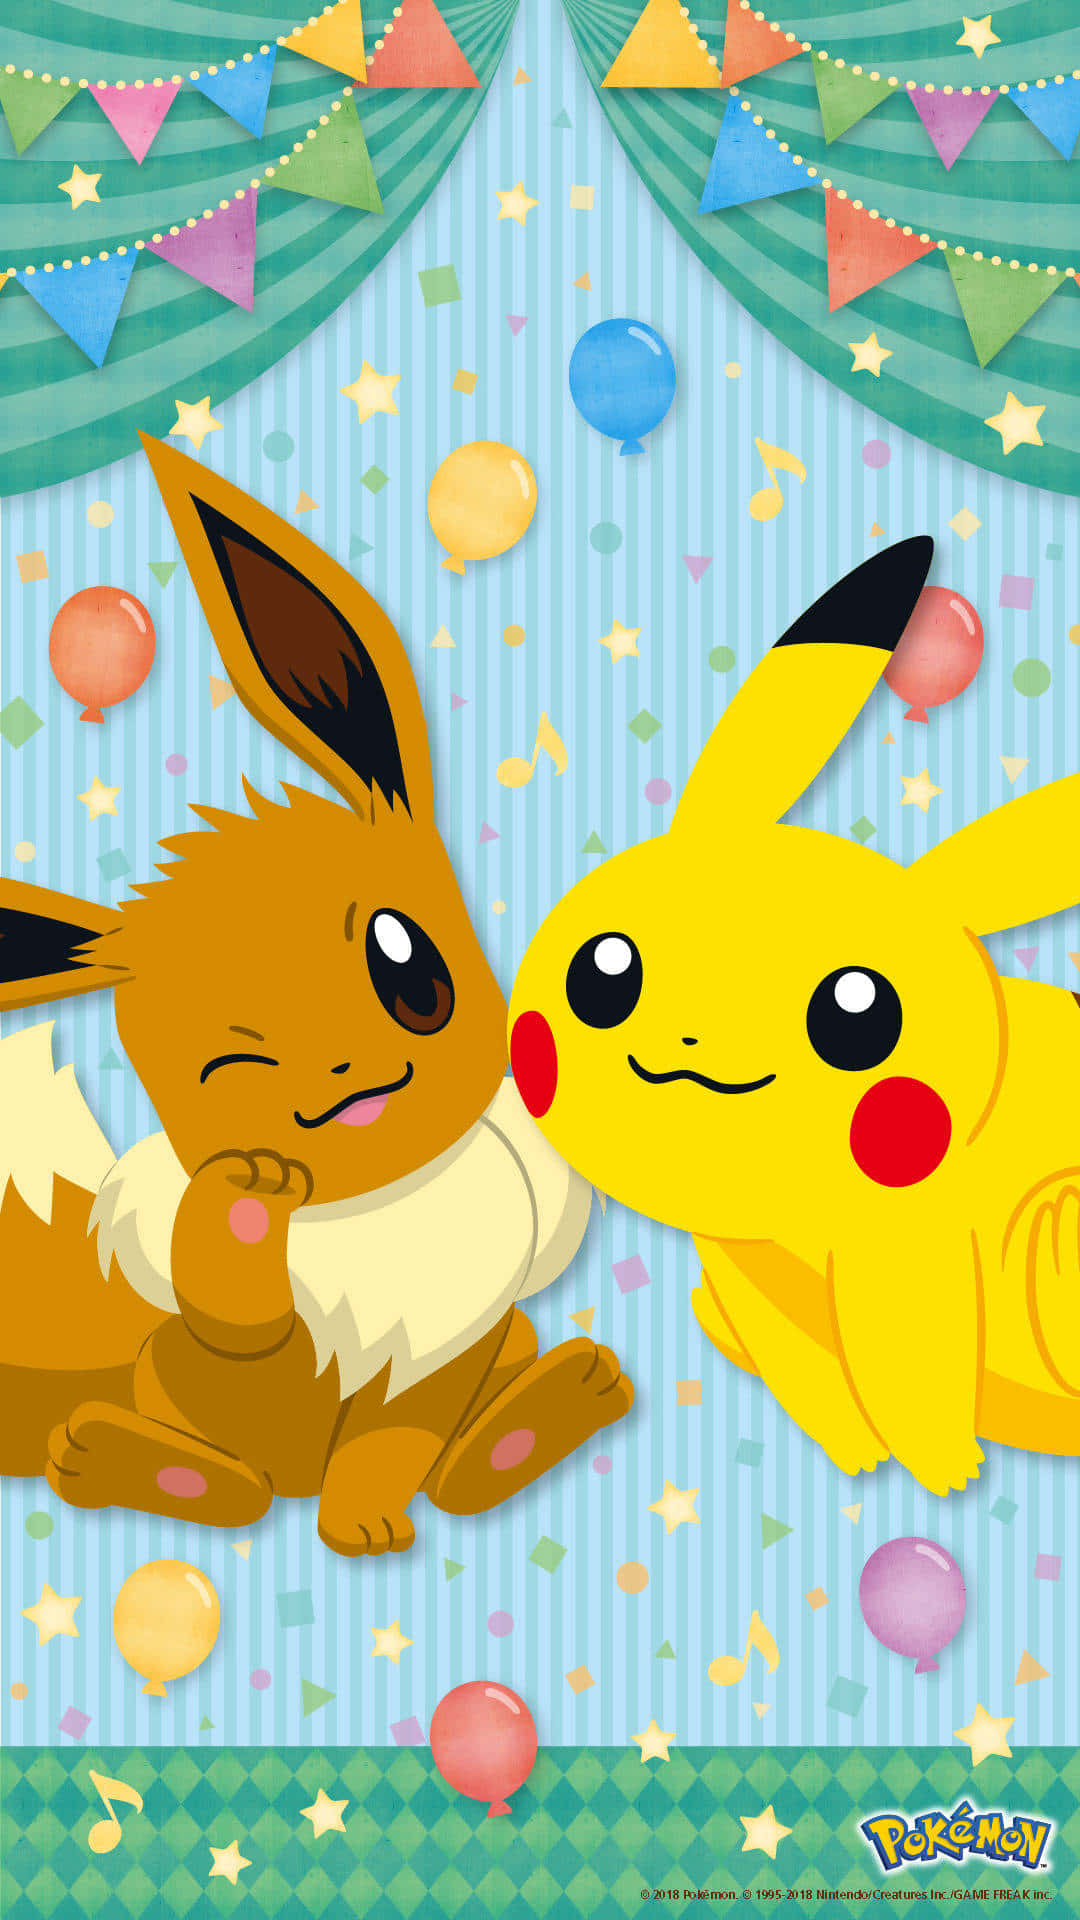 Pokemon Pikachu And Eevee Party Invitations Wallpaper